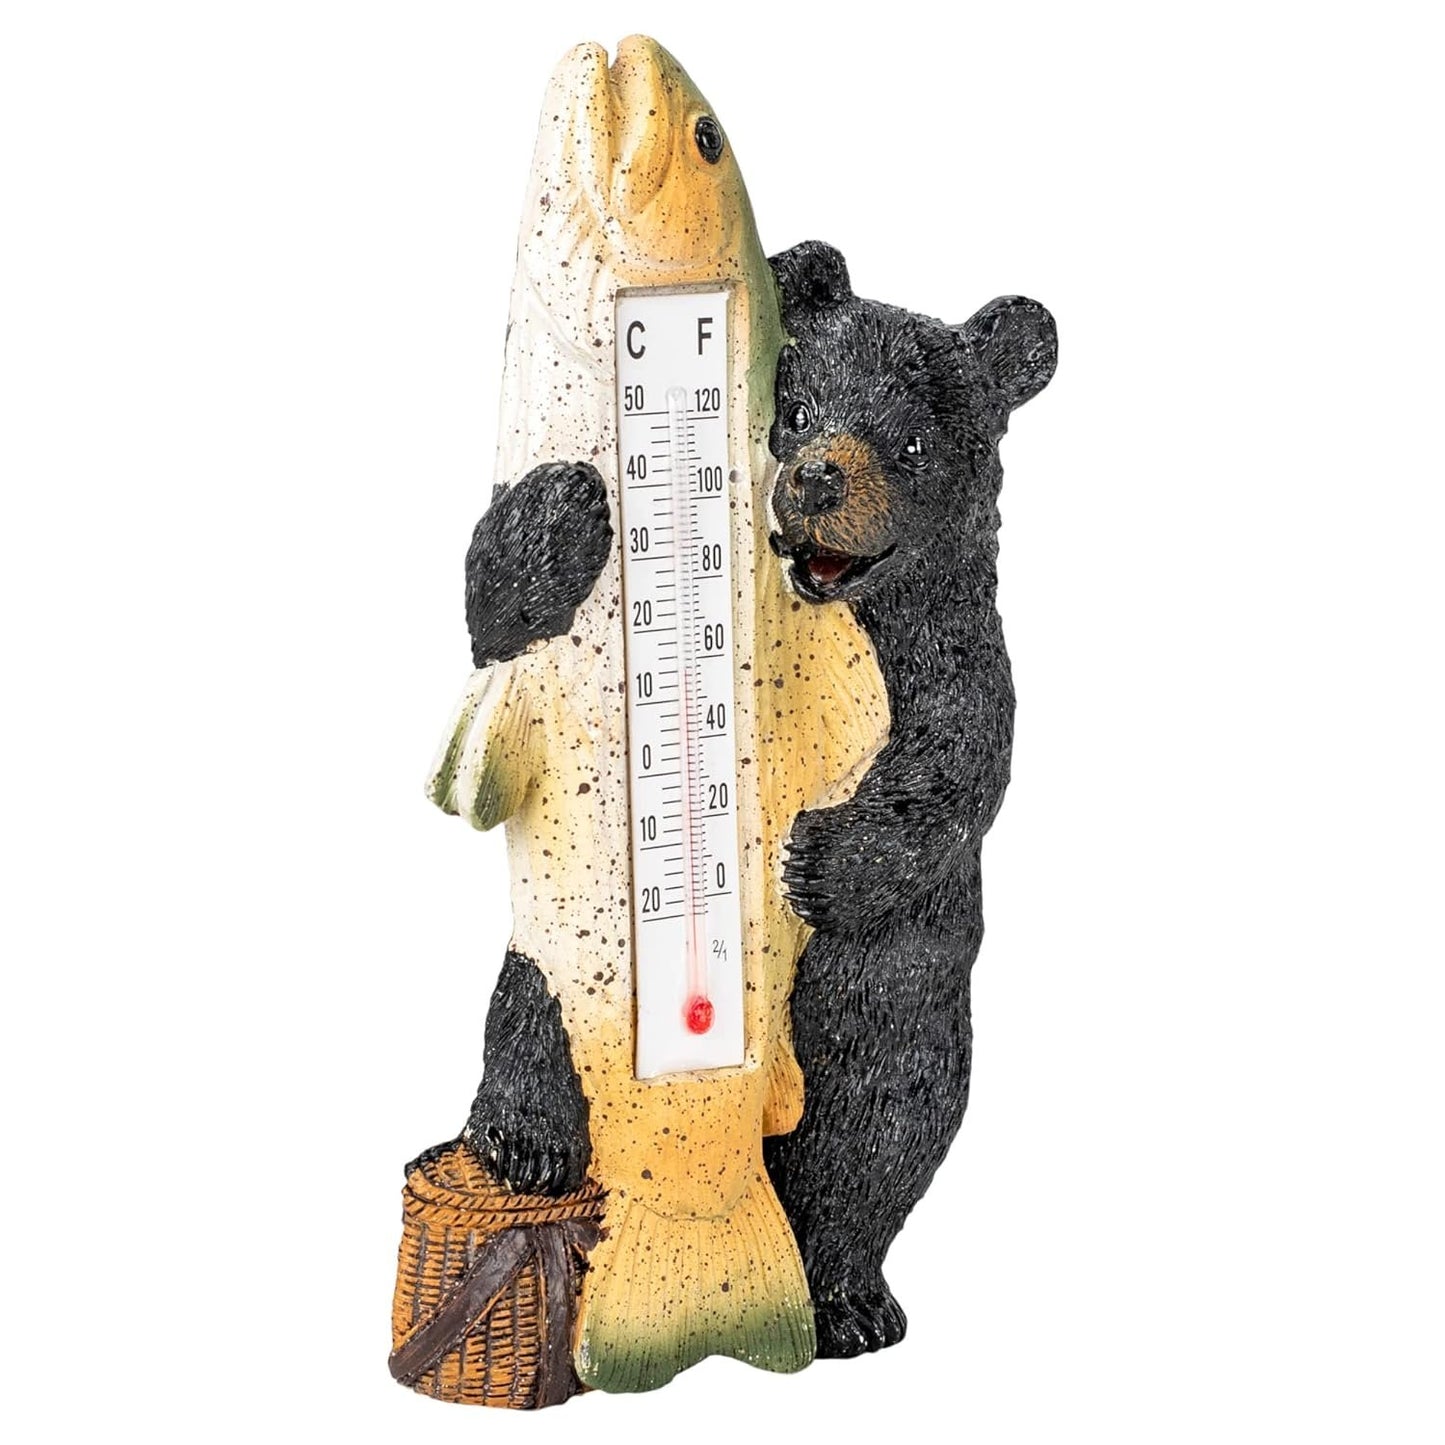 Slifka Sales Co. Chubby Black Bear Holding Fish 6.25 x 3 Resin Indoor or Outdoor Hanging Wall Thermometer, Multi (X2670)